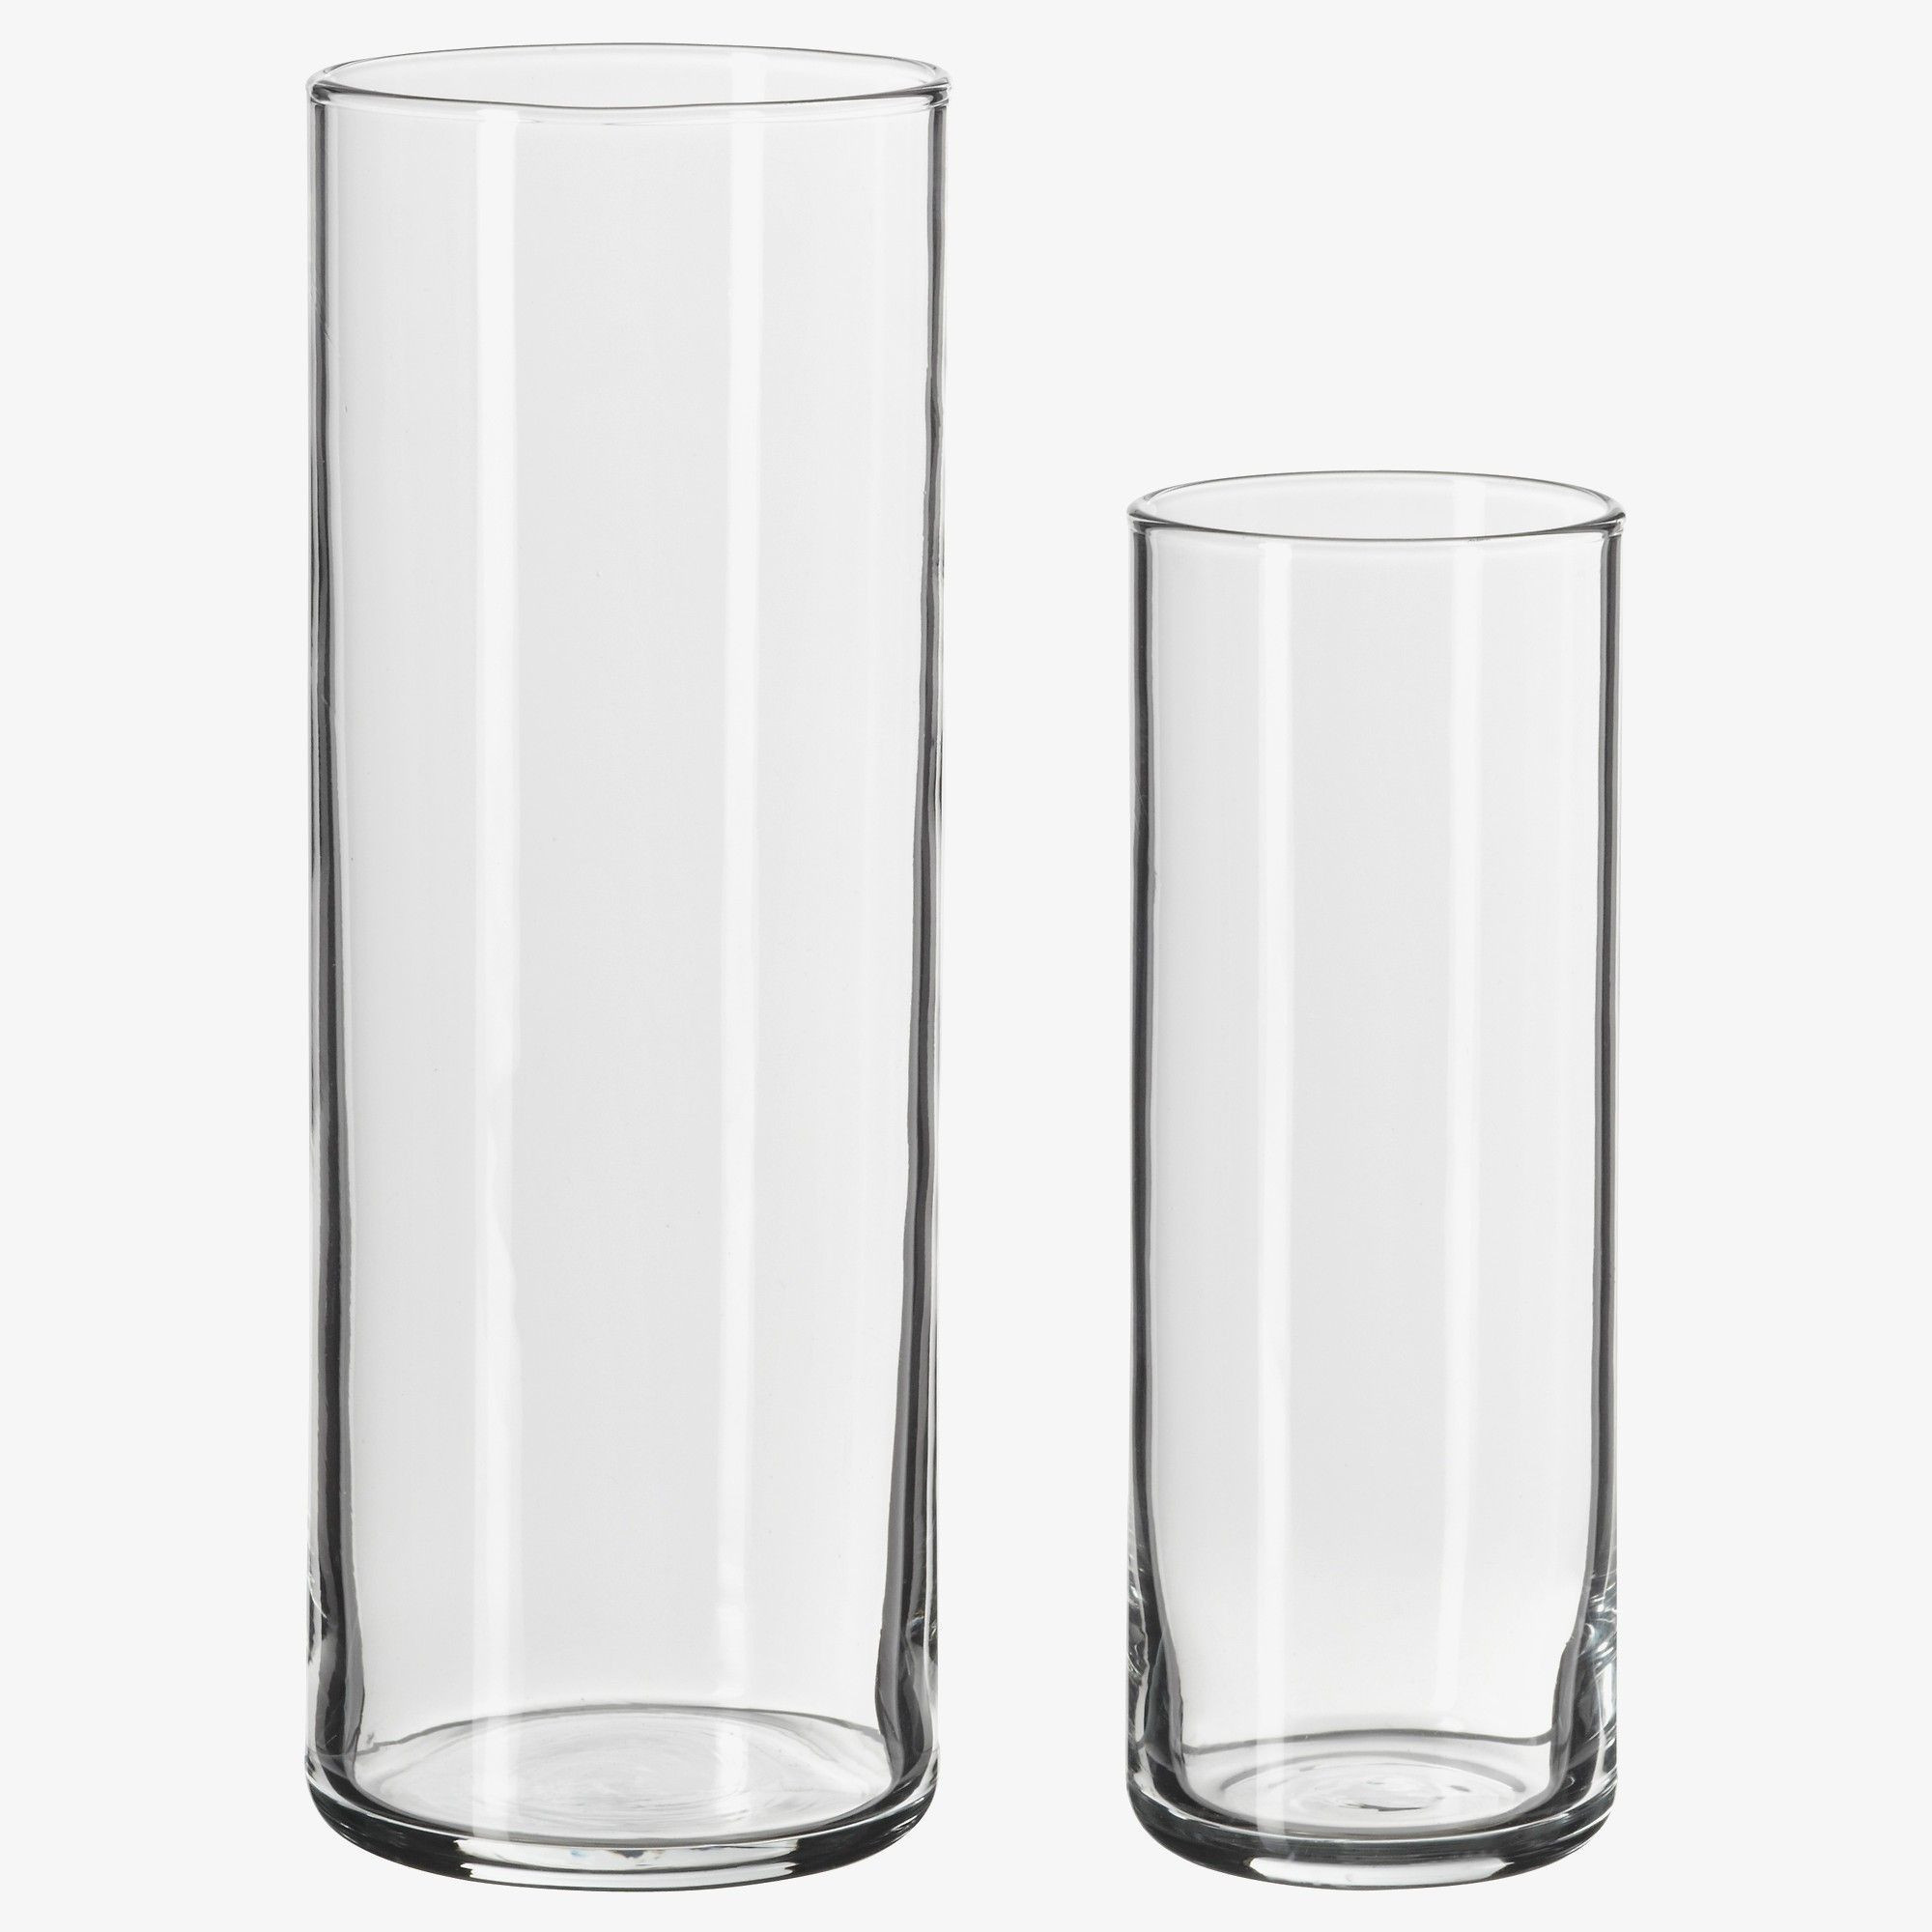 24 Stylish 20 X 4 Glass Cylinder Vase 2024 free download 20 x 4 glass cylinder vase of 40 glass vases bulk the weekly world in clear glass tv stand charming new design ikea mantel great pe s5h